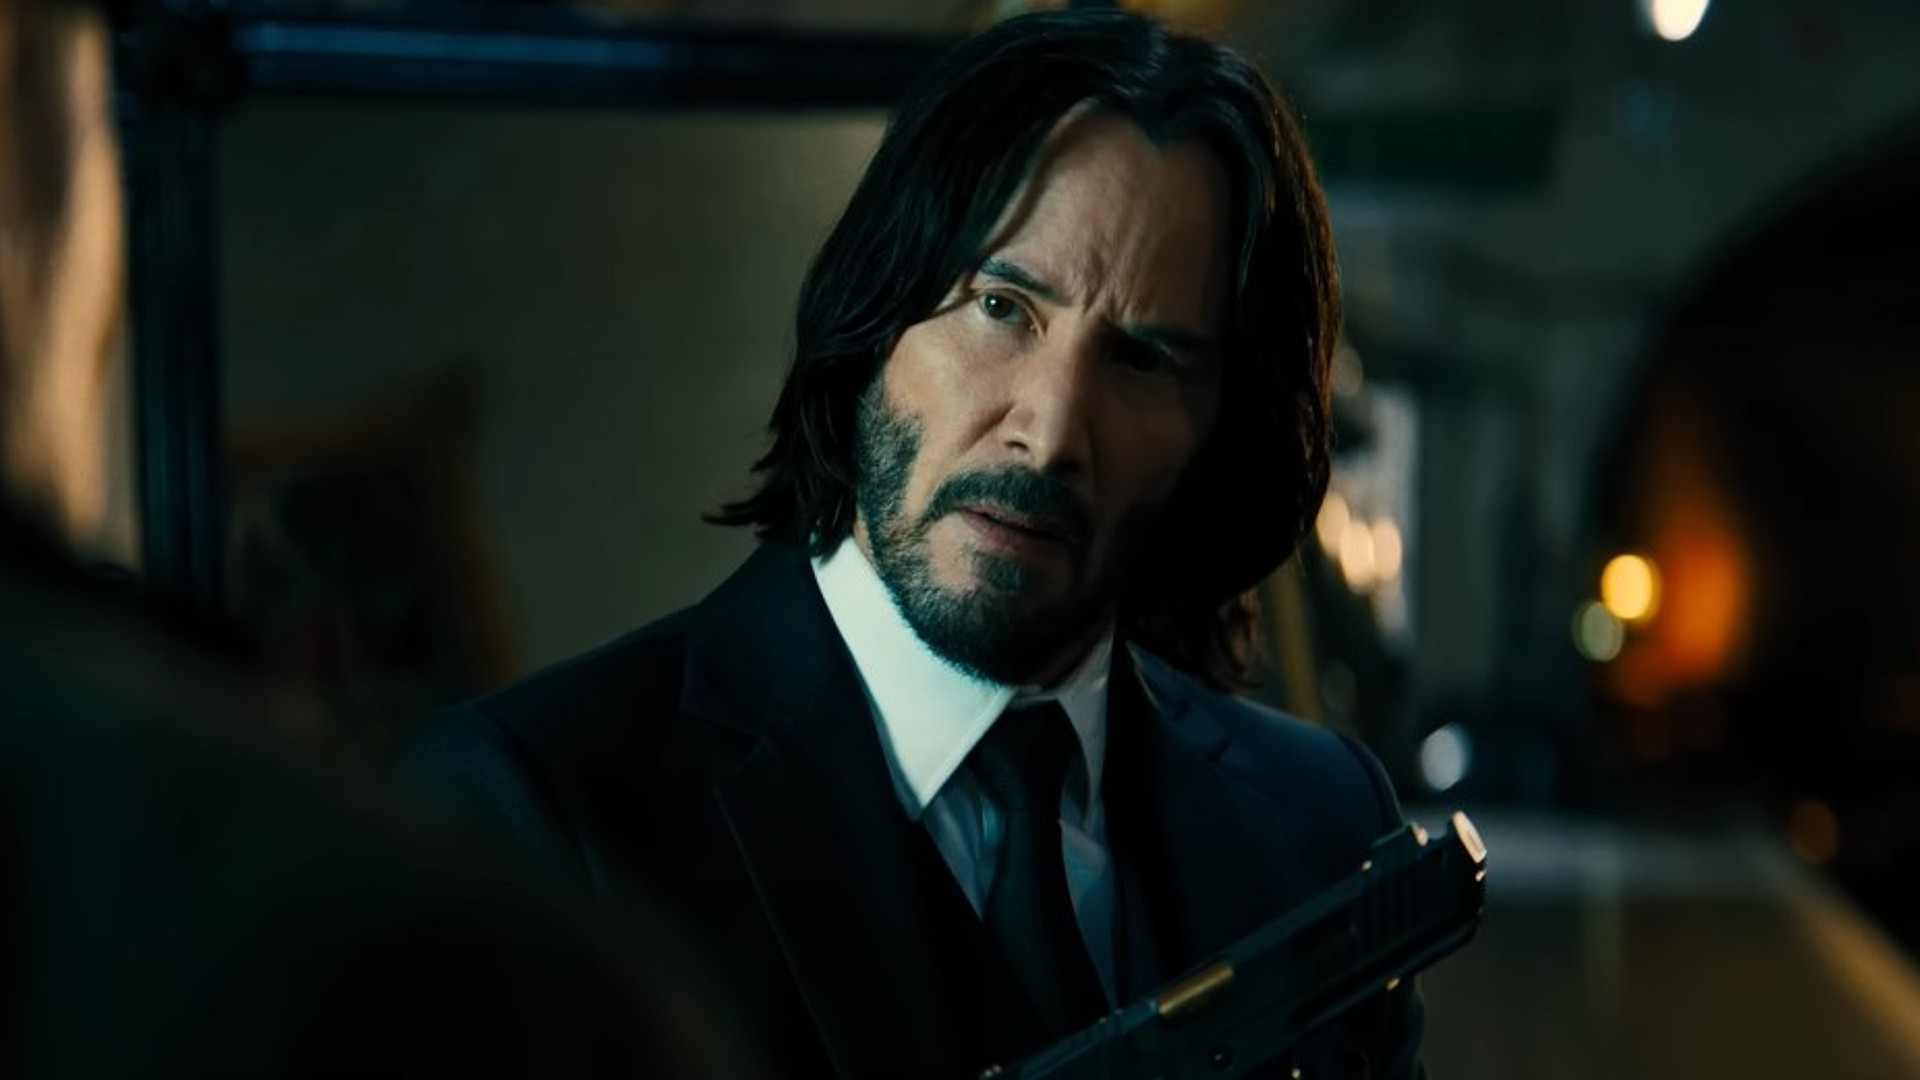 John Wick 5': Chad Stahelski Says They Haven't Cracked The Why